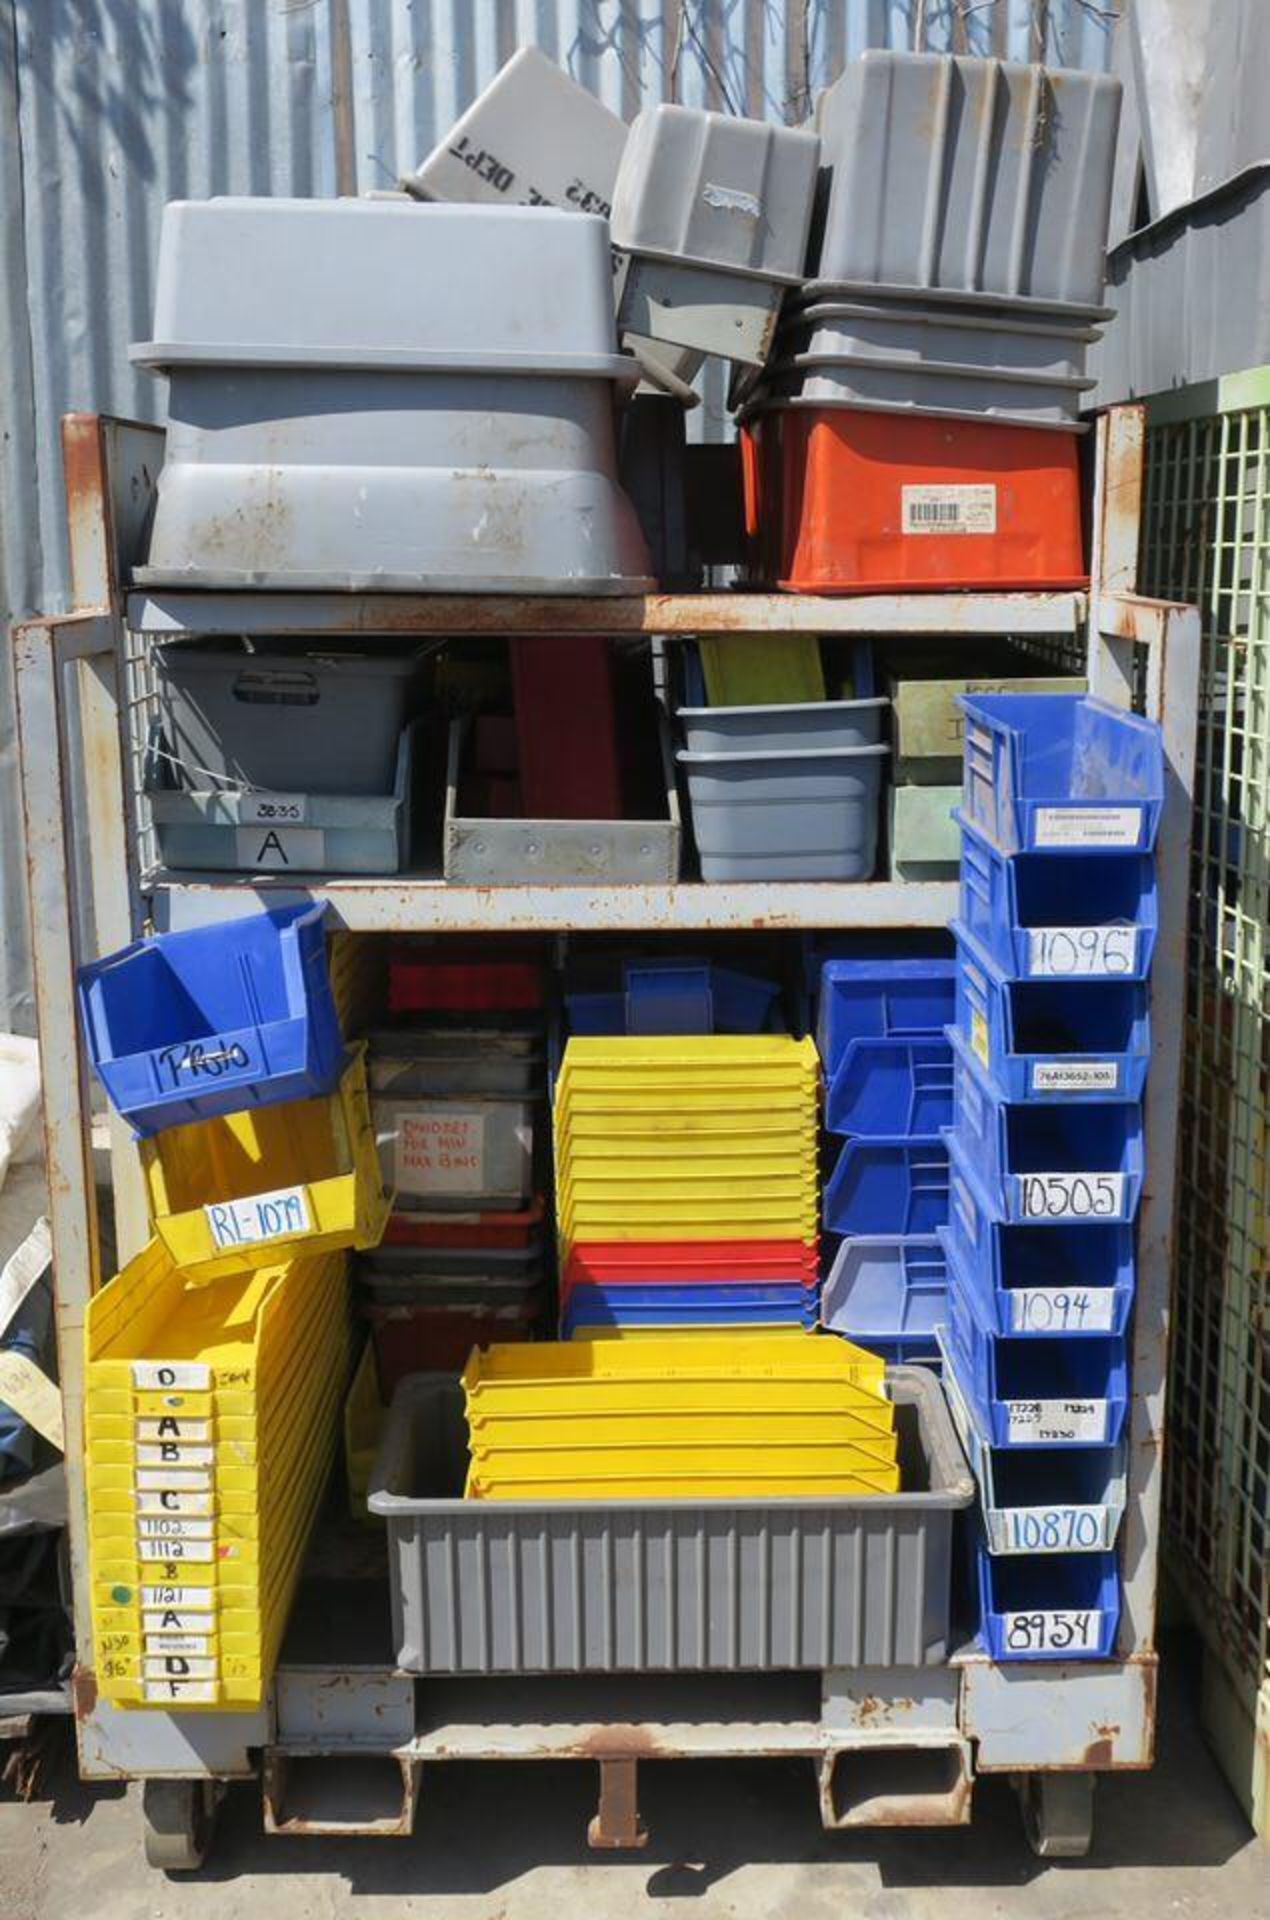 LOT of Misc. Plastic Bins + Gray 3-Shelf Rolling Rack with Forklift Tine Slots